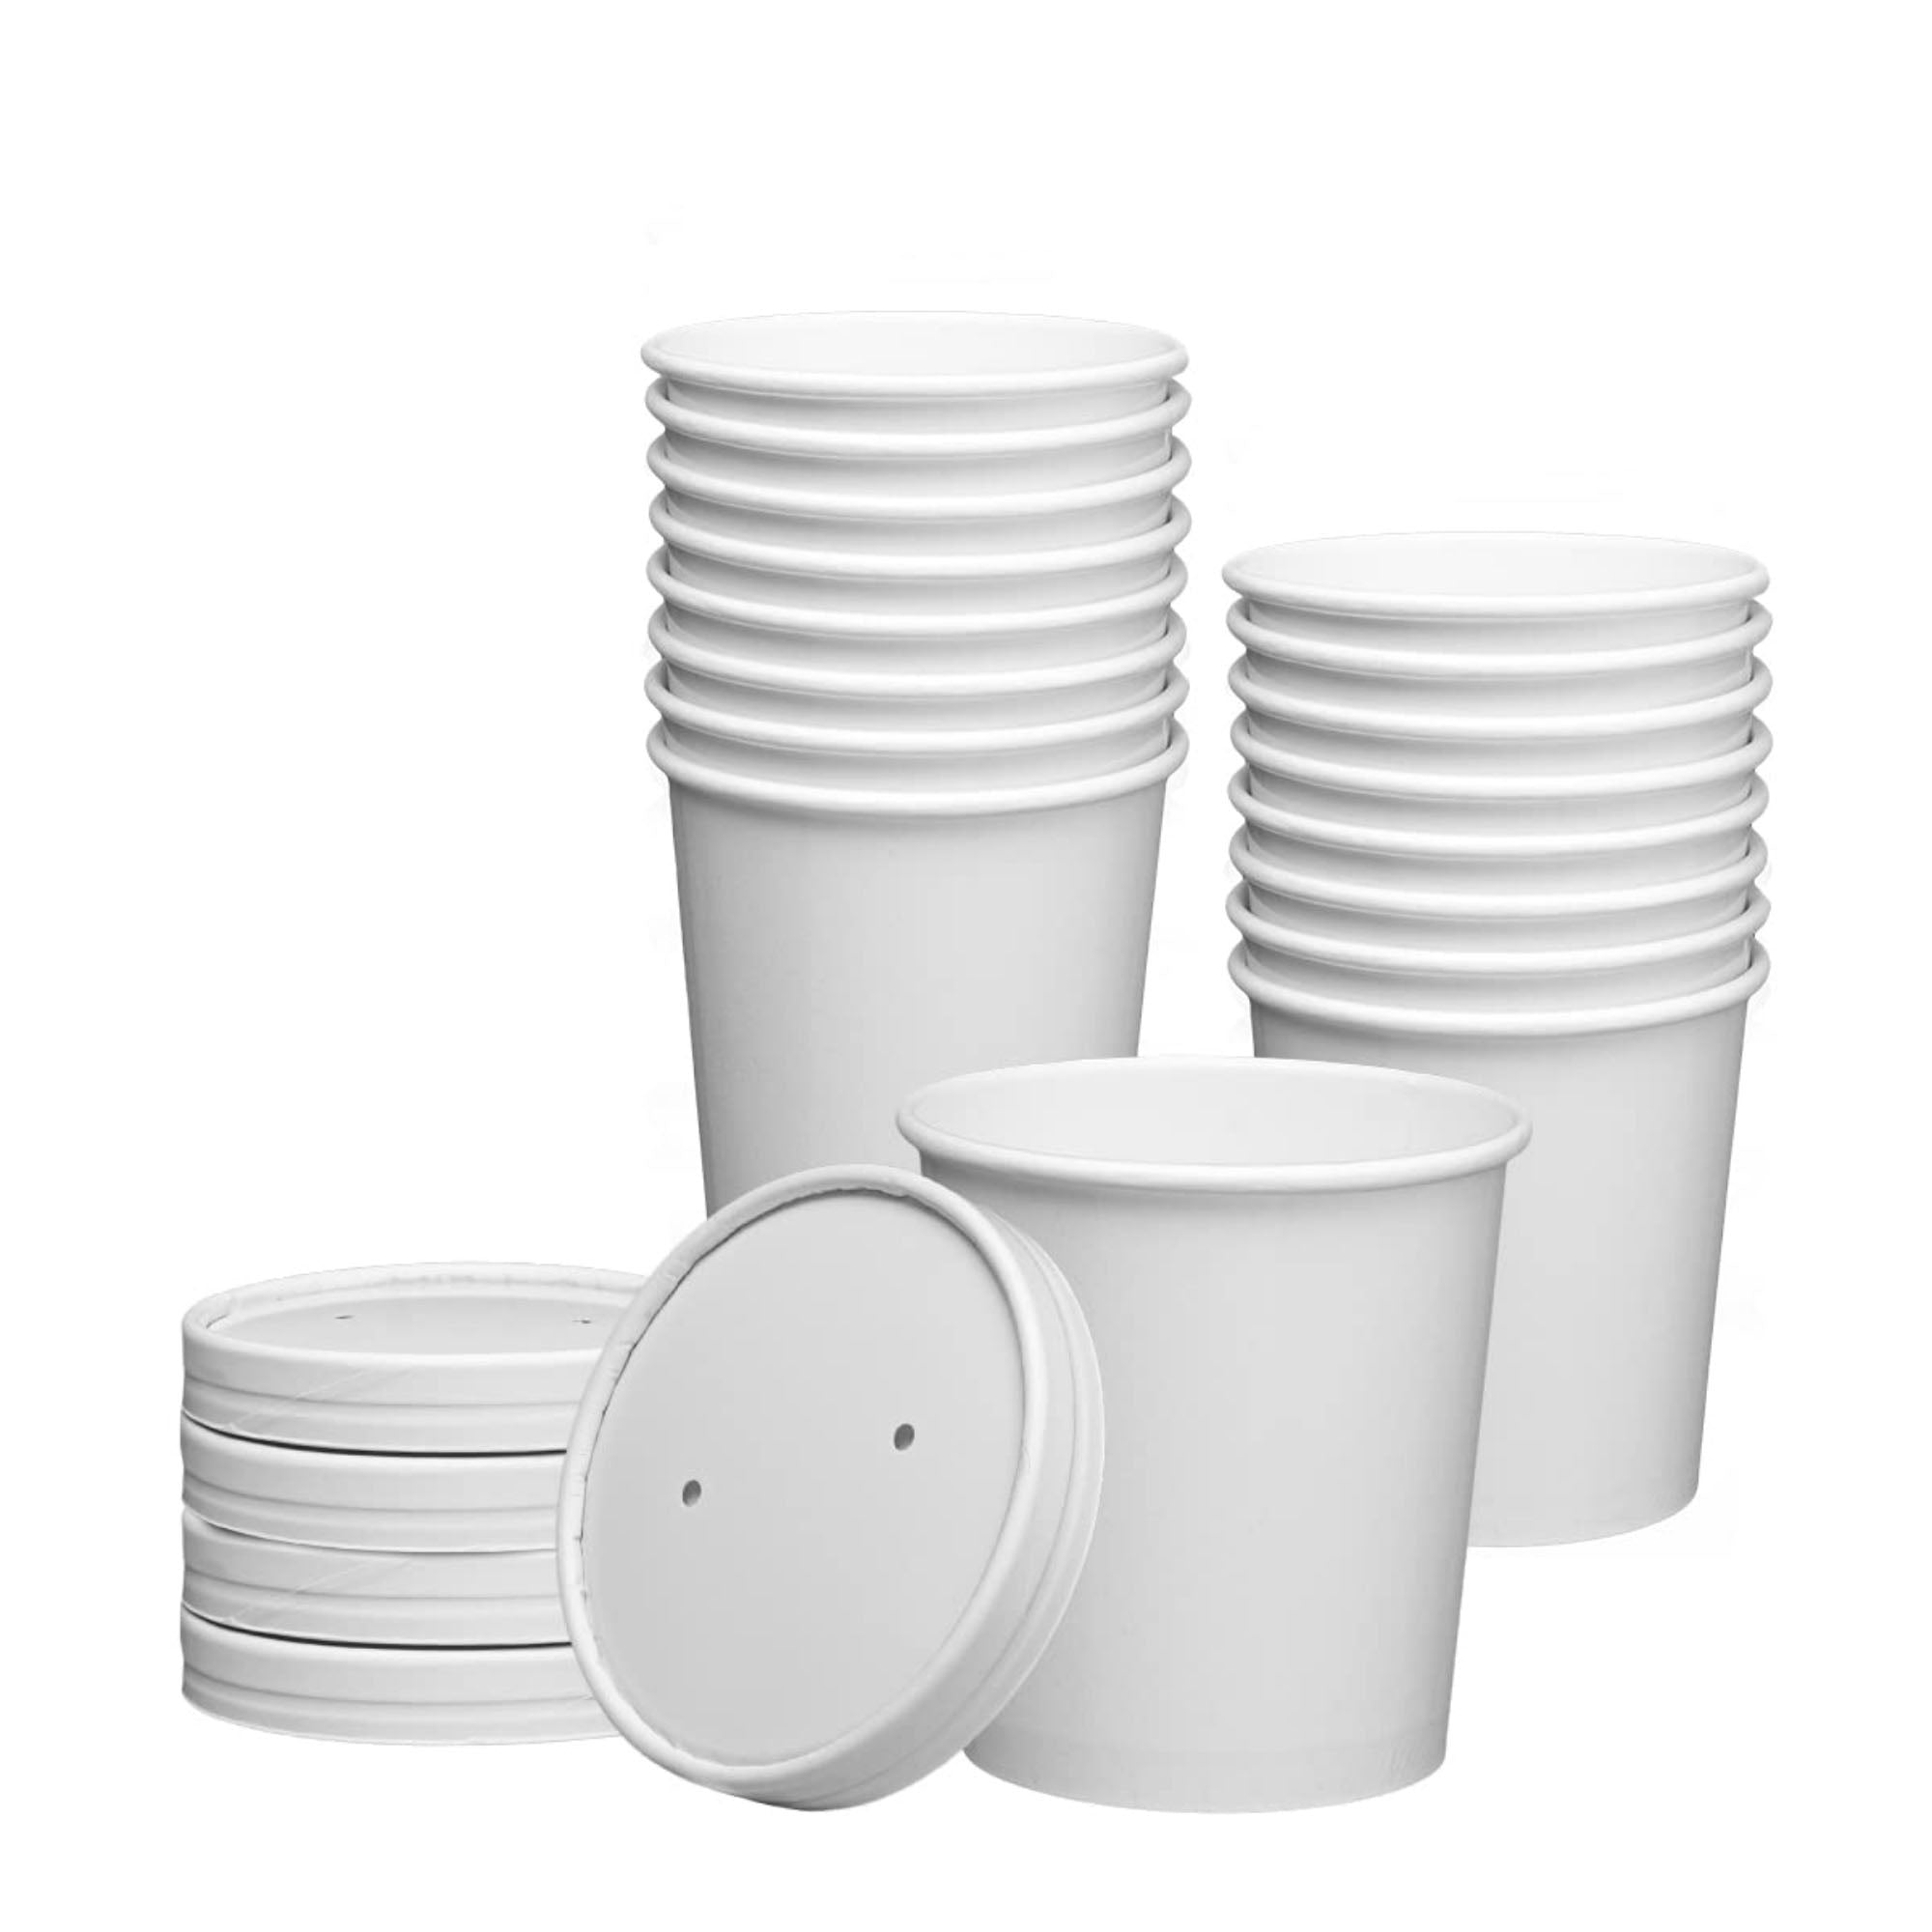 White Paper Lid, avoid leaks, durable, warming, biodegradable, paper flat lids, freshness, takeout, Packaging, easy visibility, food safe, avoid leaks, high-quality, dinnerware, recyclable lids, Ecosmart, sustainable, coffee, tea